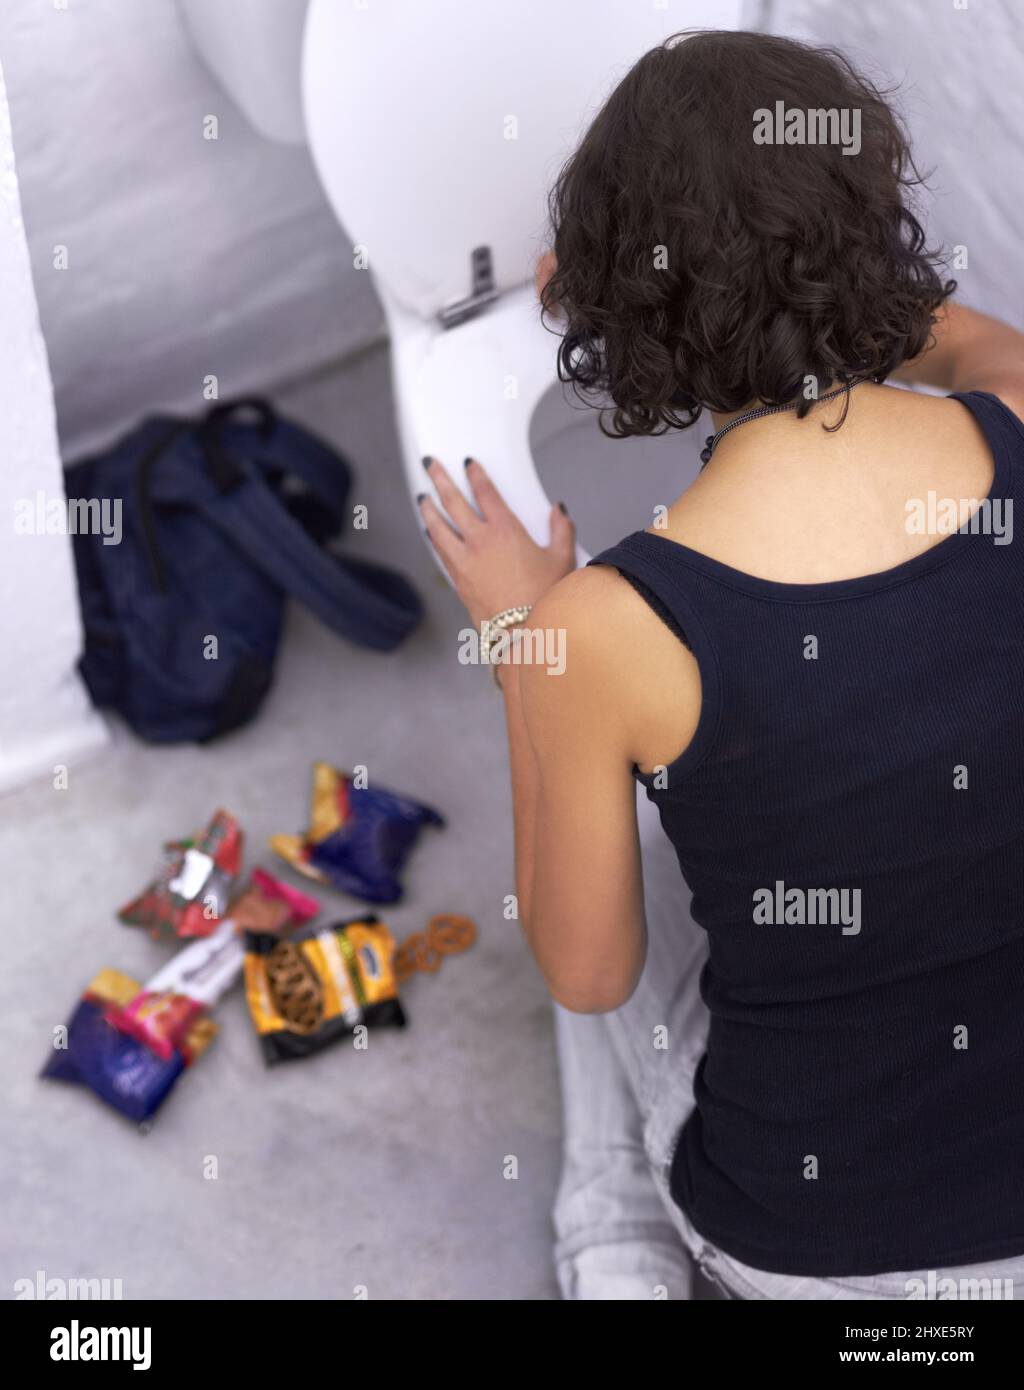 Say no to sugar. A young woman holding baked goods with her mouth covered. Stock Photo